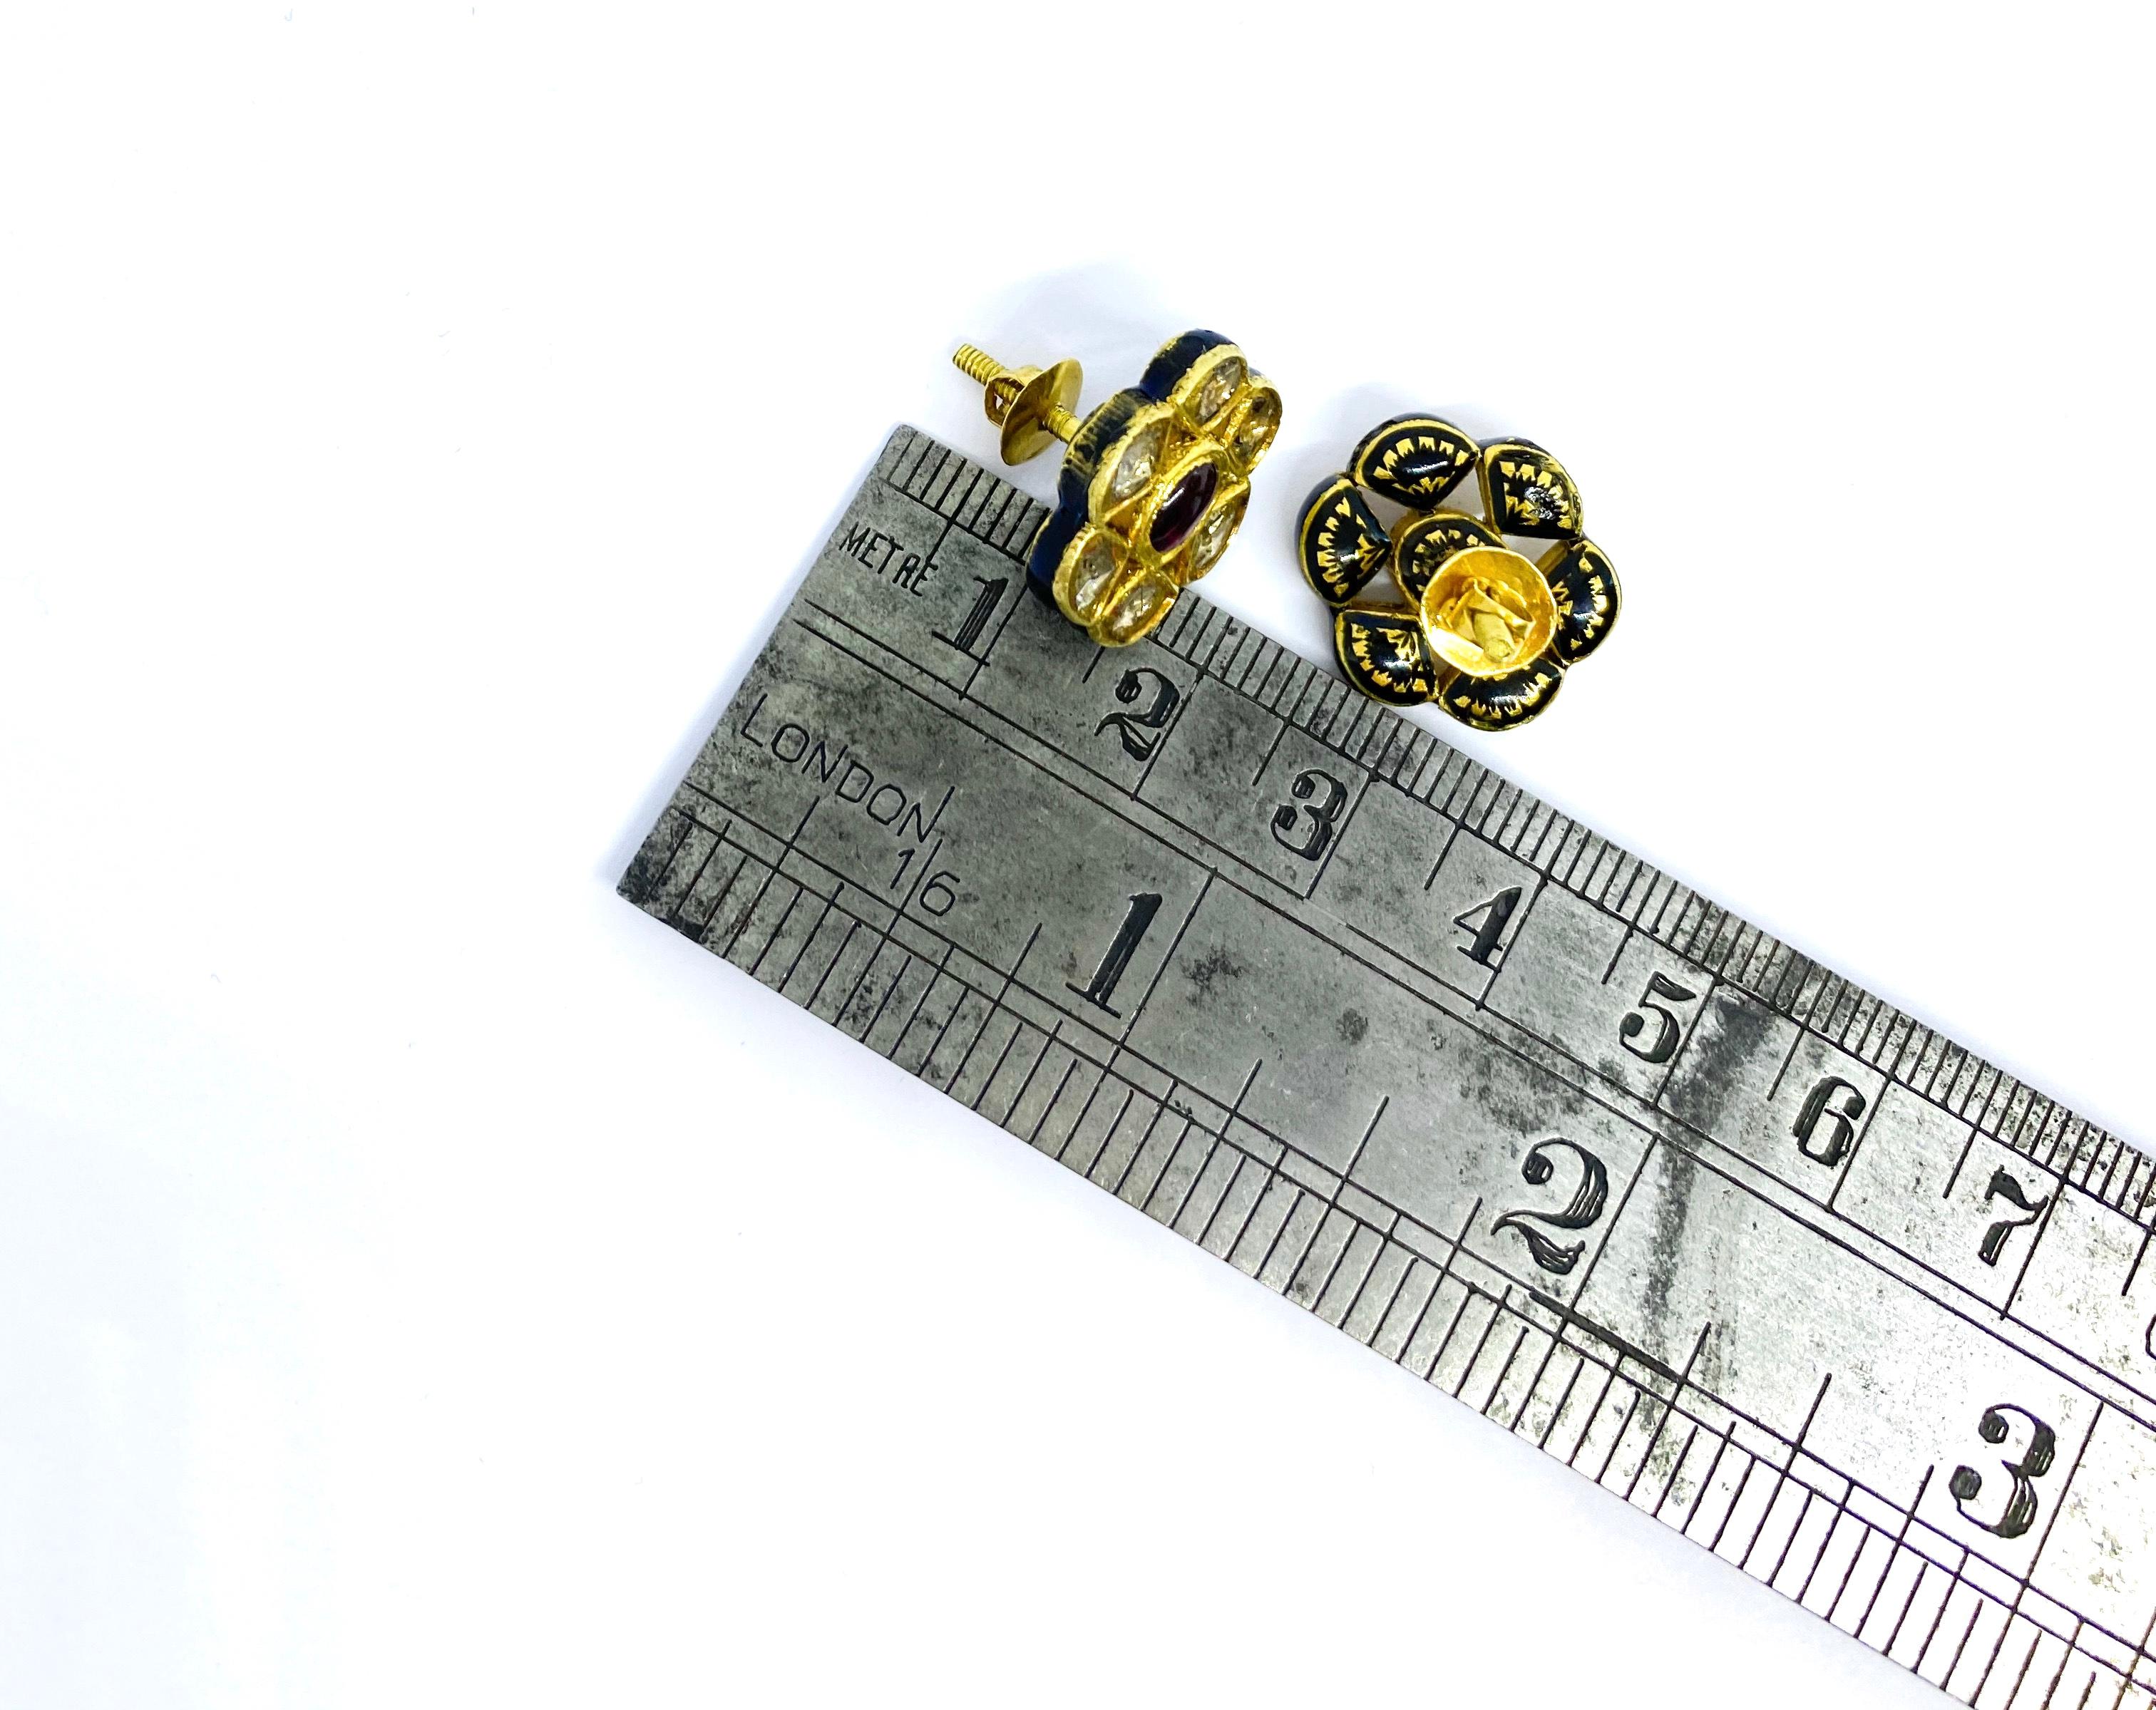 22 carat yellow gold Indian enamel diamond
Indian Earrings,
Gold jewelry about 22kars
The age is probably the 20th century
Jewelry with big diamonds and a fine enamel decoration on the back.
There are no stamps on the jewelry.
Pins with screw